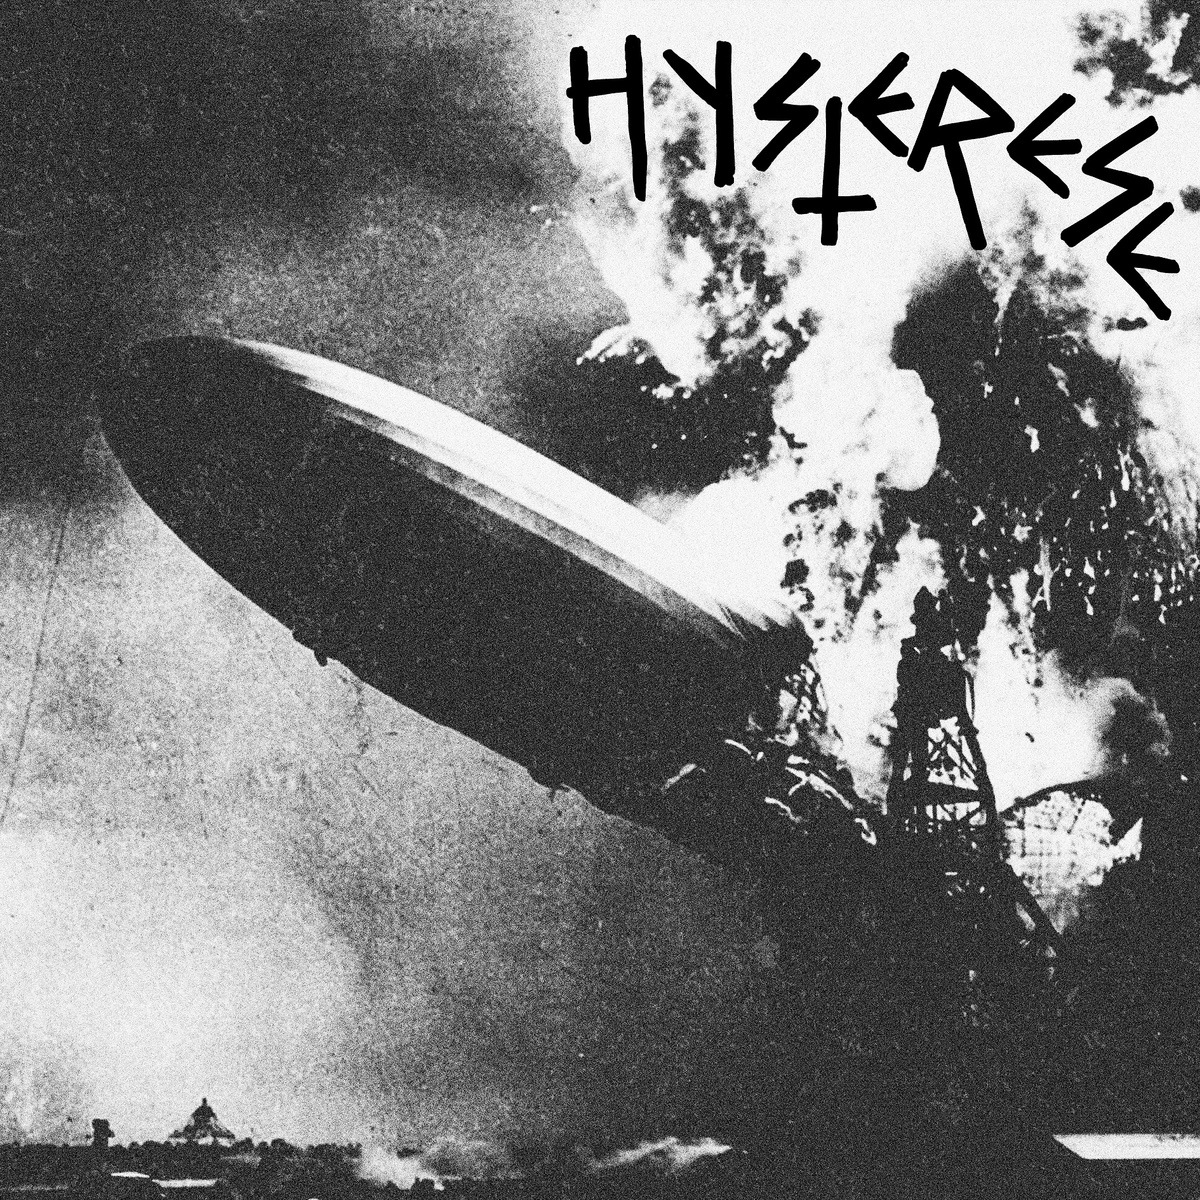 Hysterese – s/t